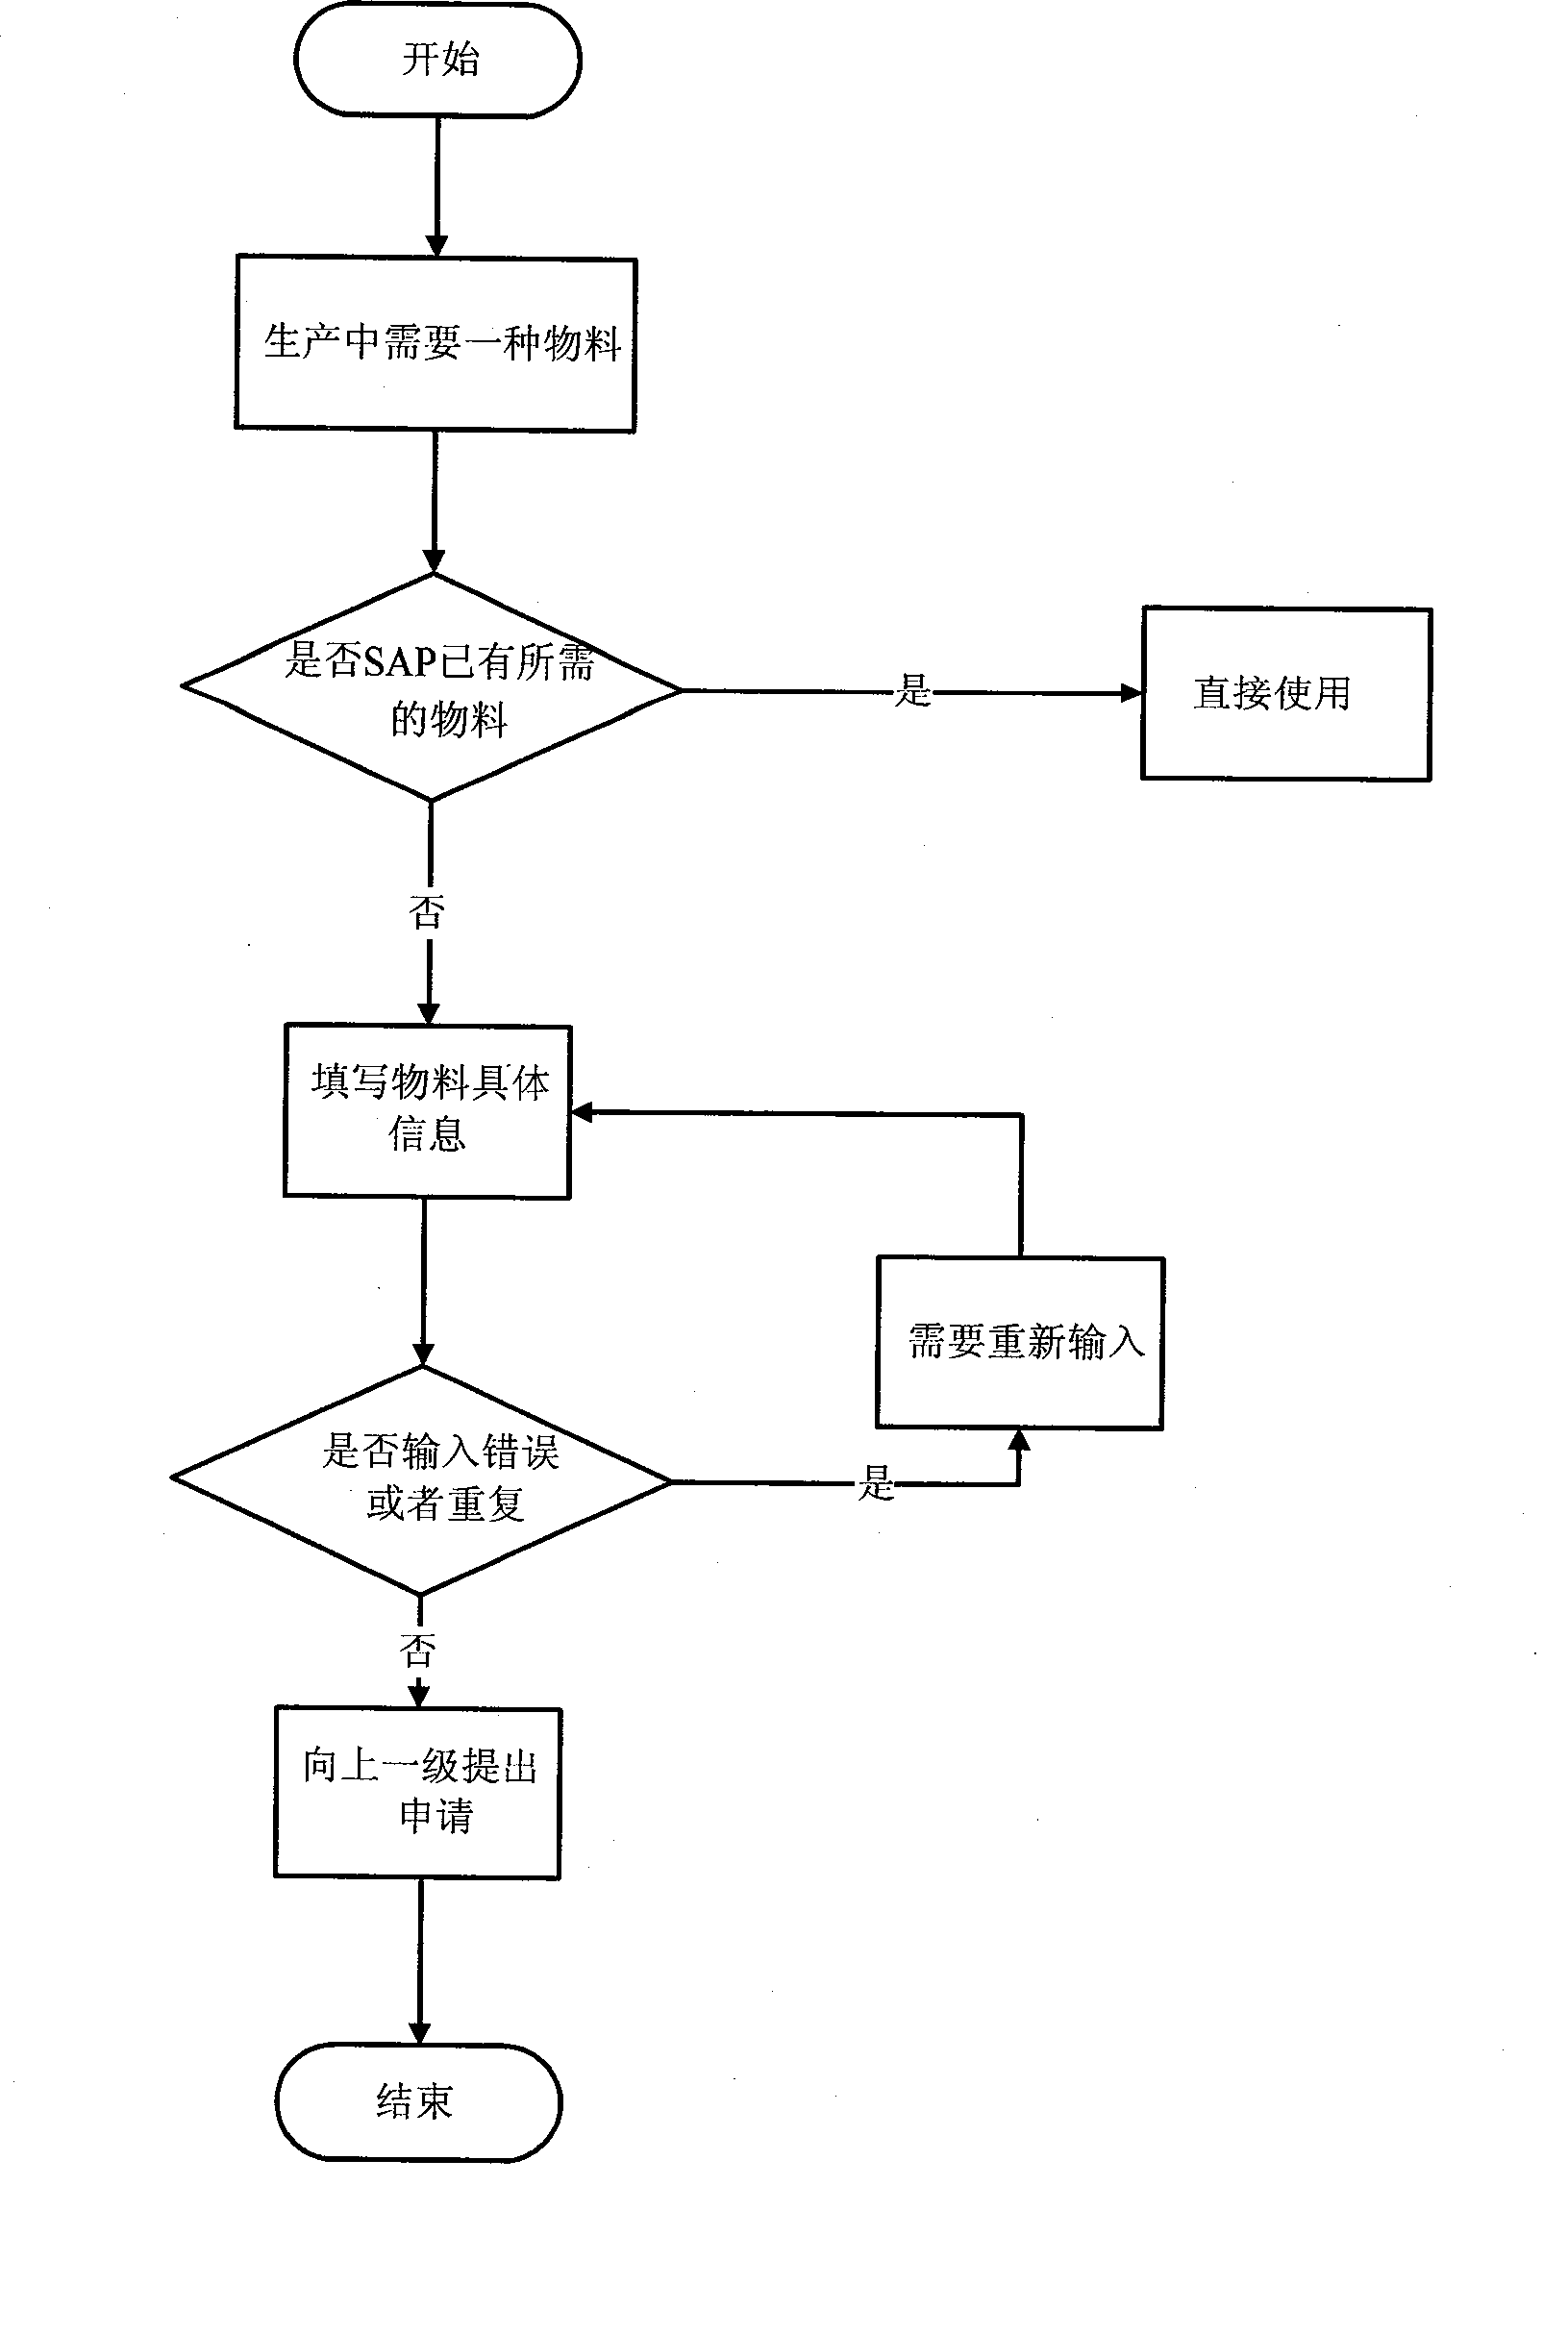 Management method and system for material encode